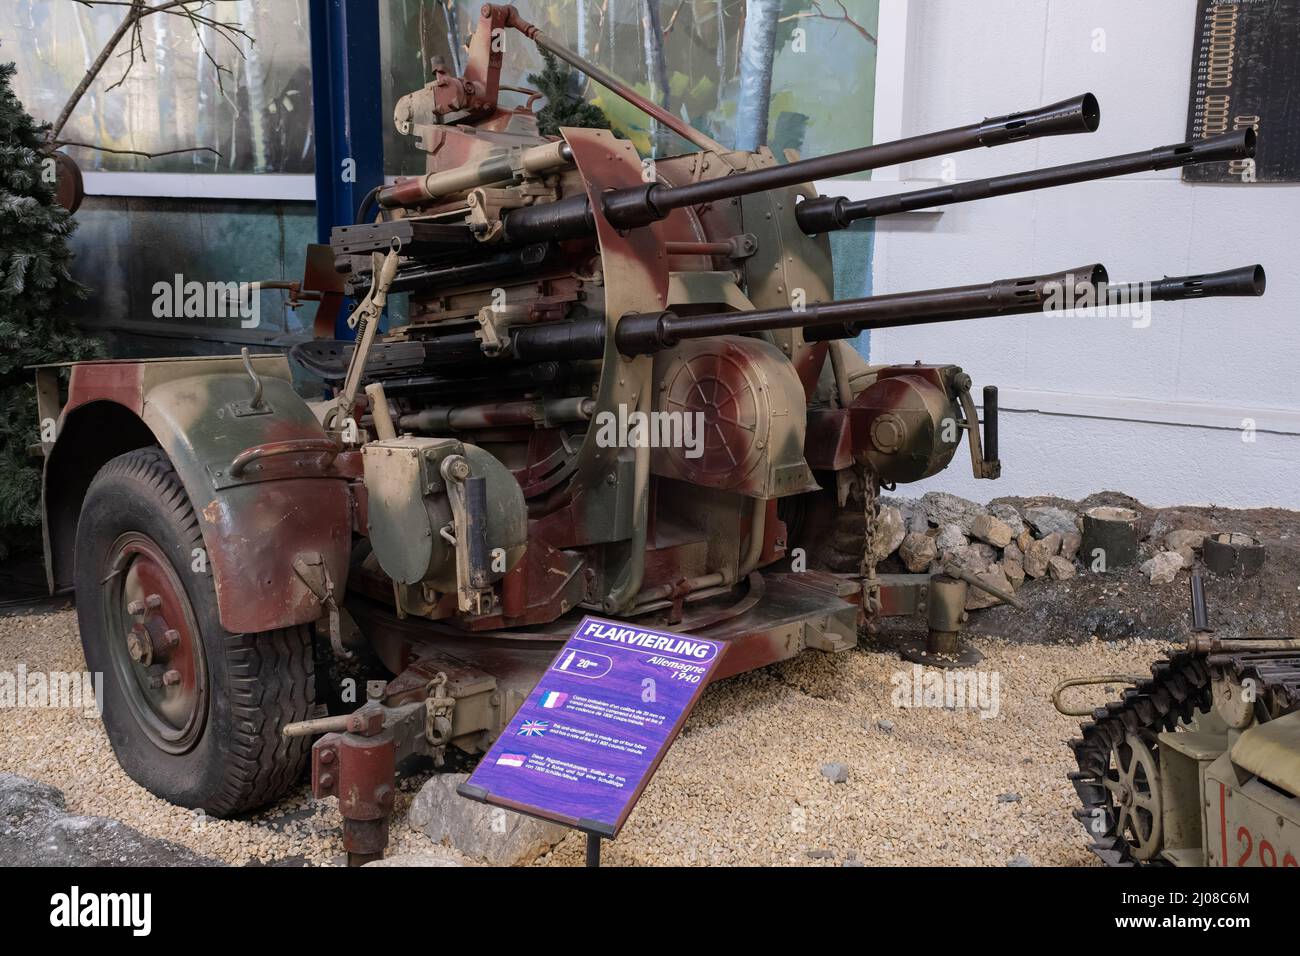 Saumur, France - February 26, 2022:  German Flakvierling (anti aircraft gun). Tank museum in Saumur (Musee des Blindes). Second world war exhibition. Stock Photo